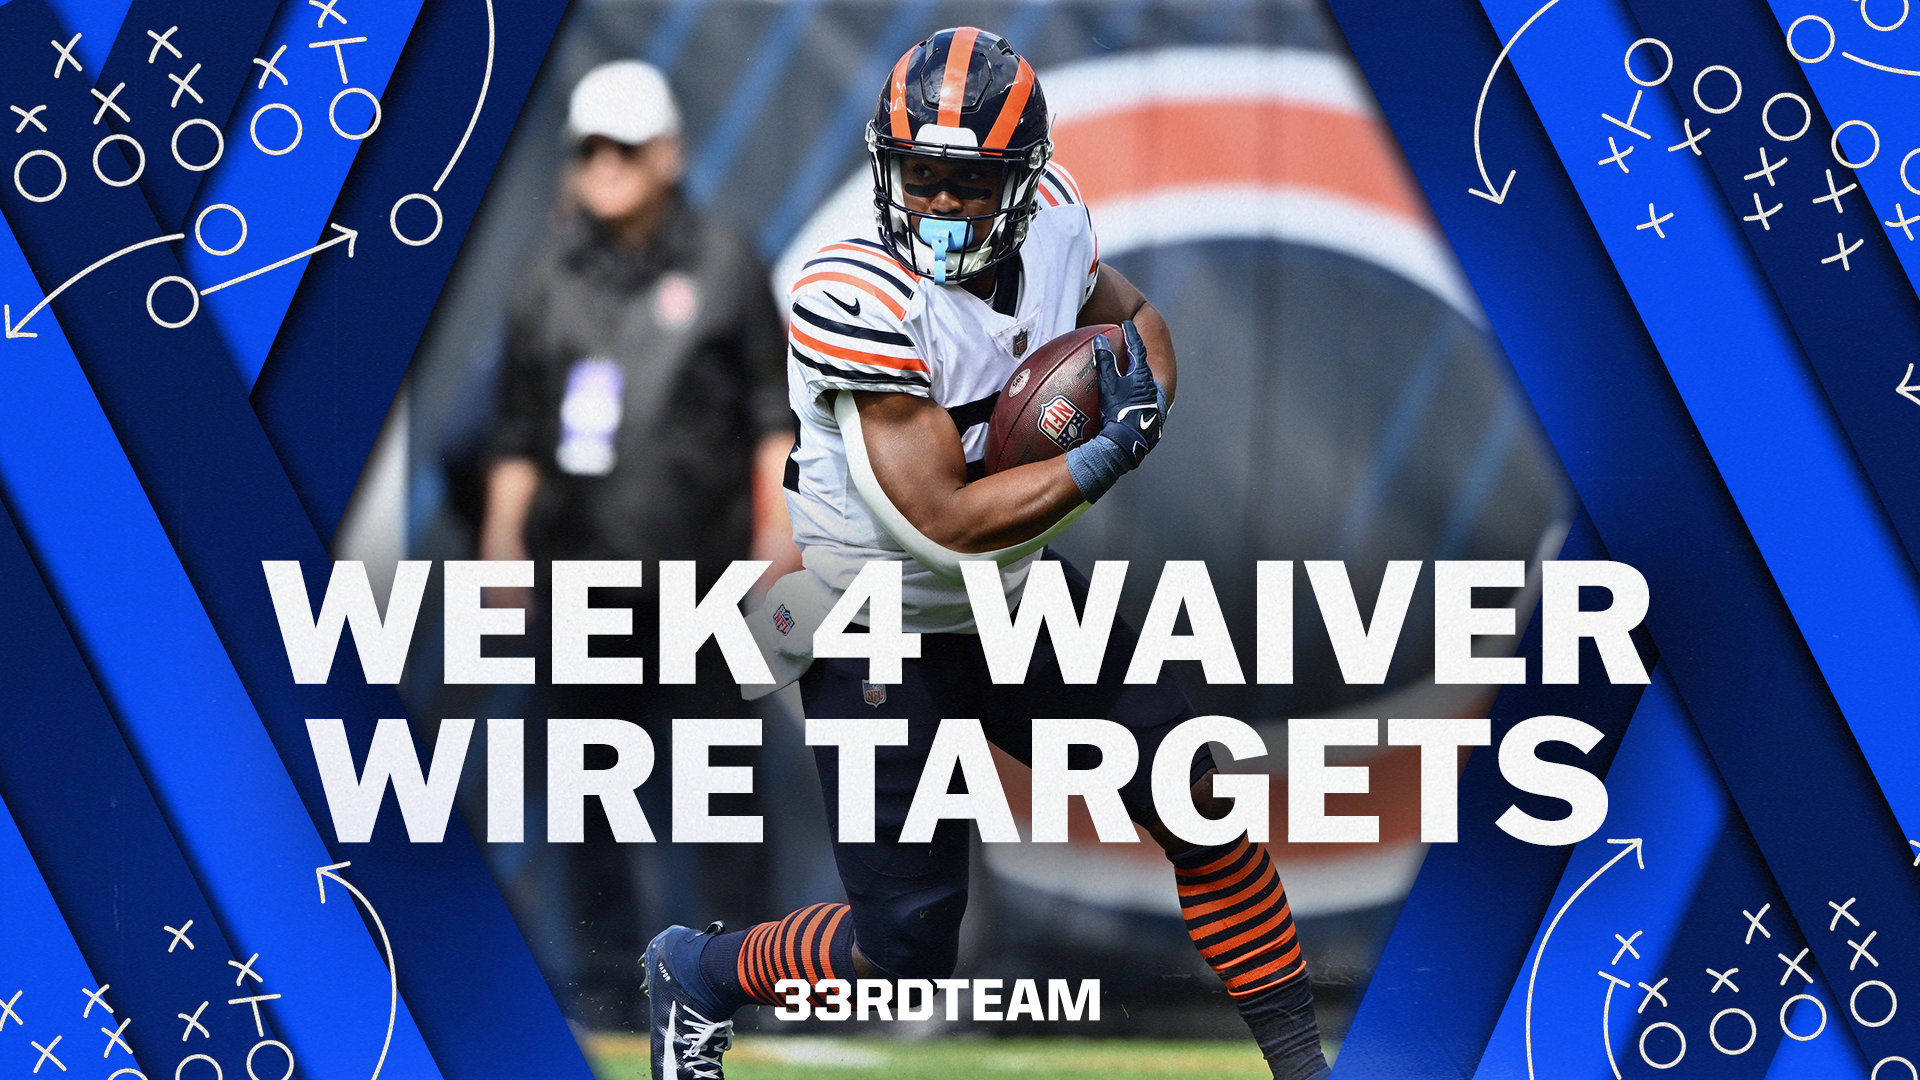 Waiver Wire Targets for Week 4